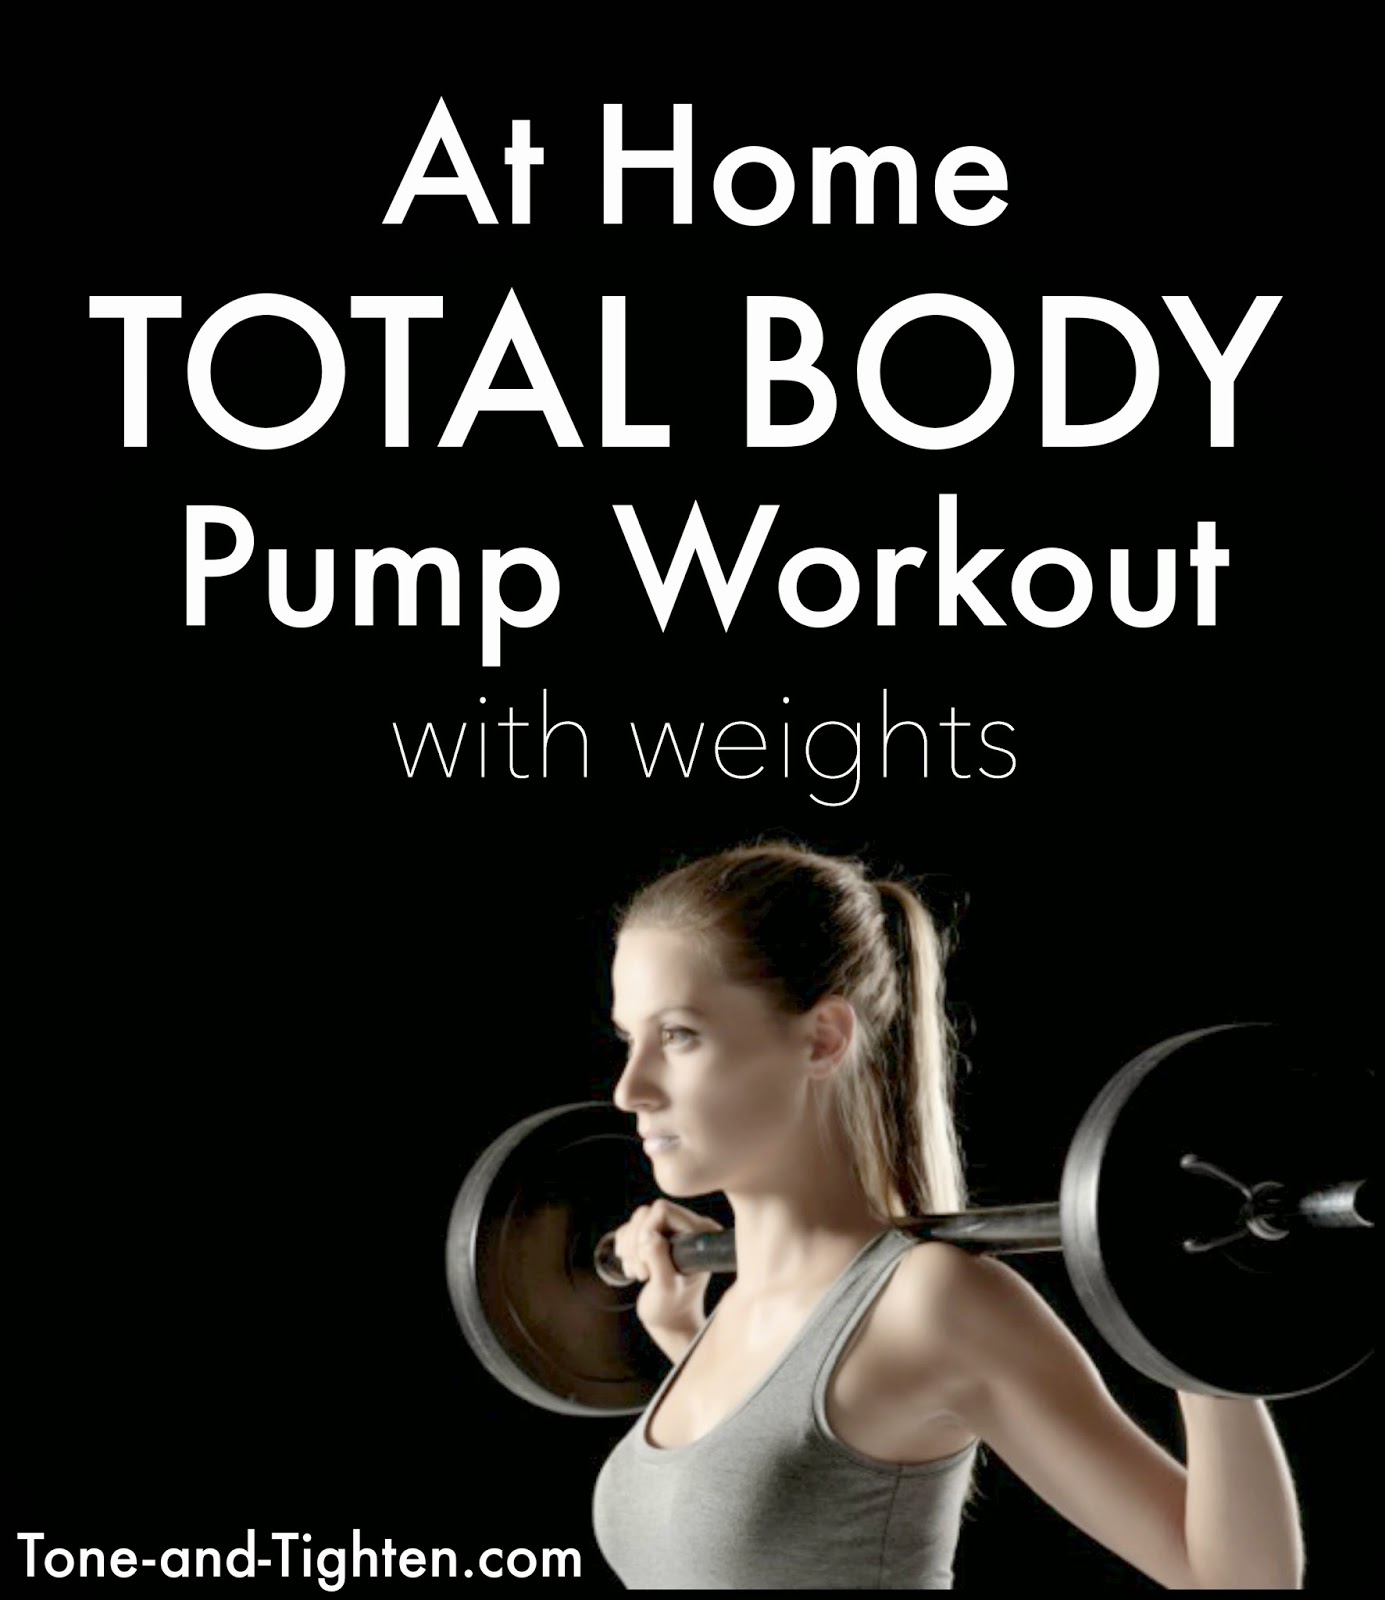 At Home Total Body Pump Workout with Weights